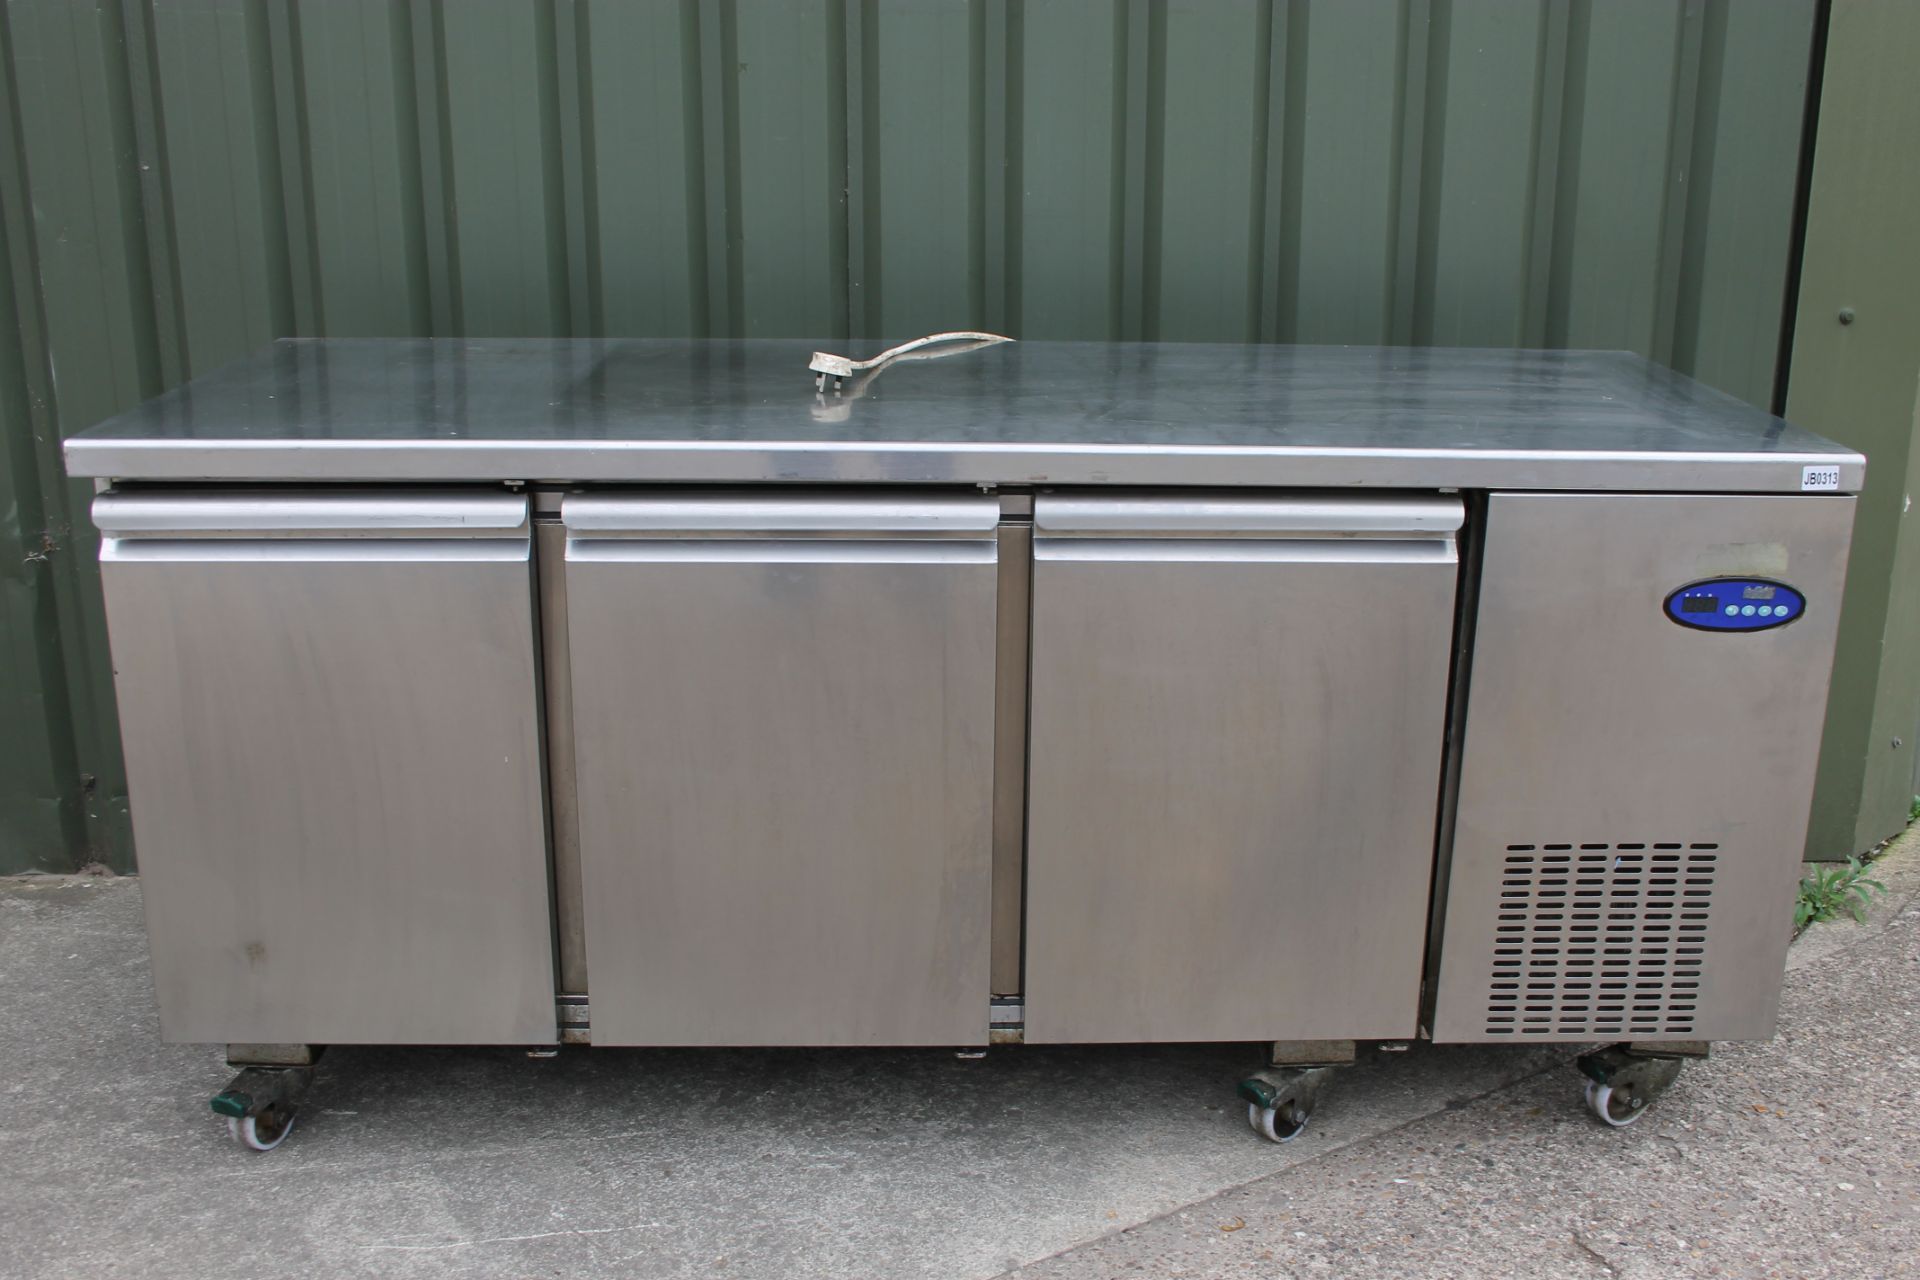 LTH Three Door Stainless Steel Bench Freezer – PHZ3/1R-1R-1R only 3 shelves - Image 3 of 3